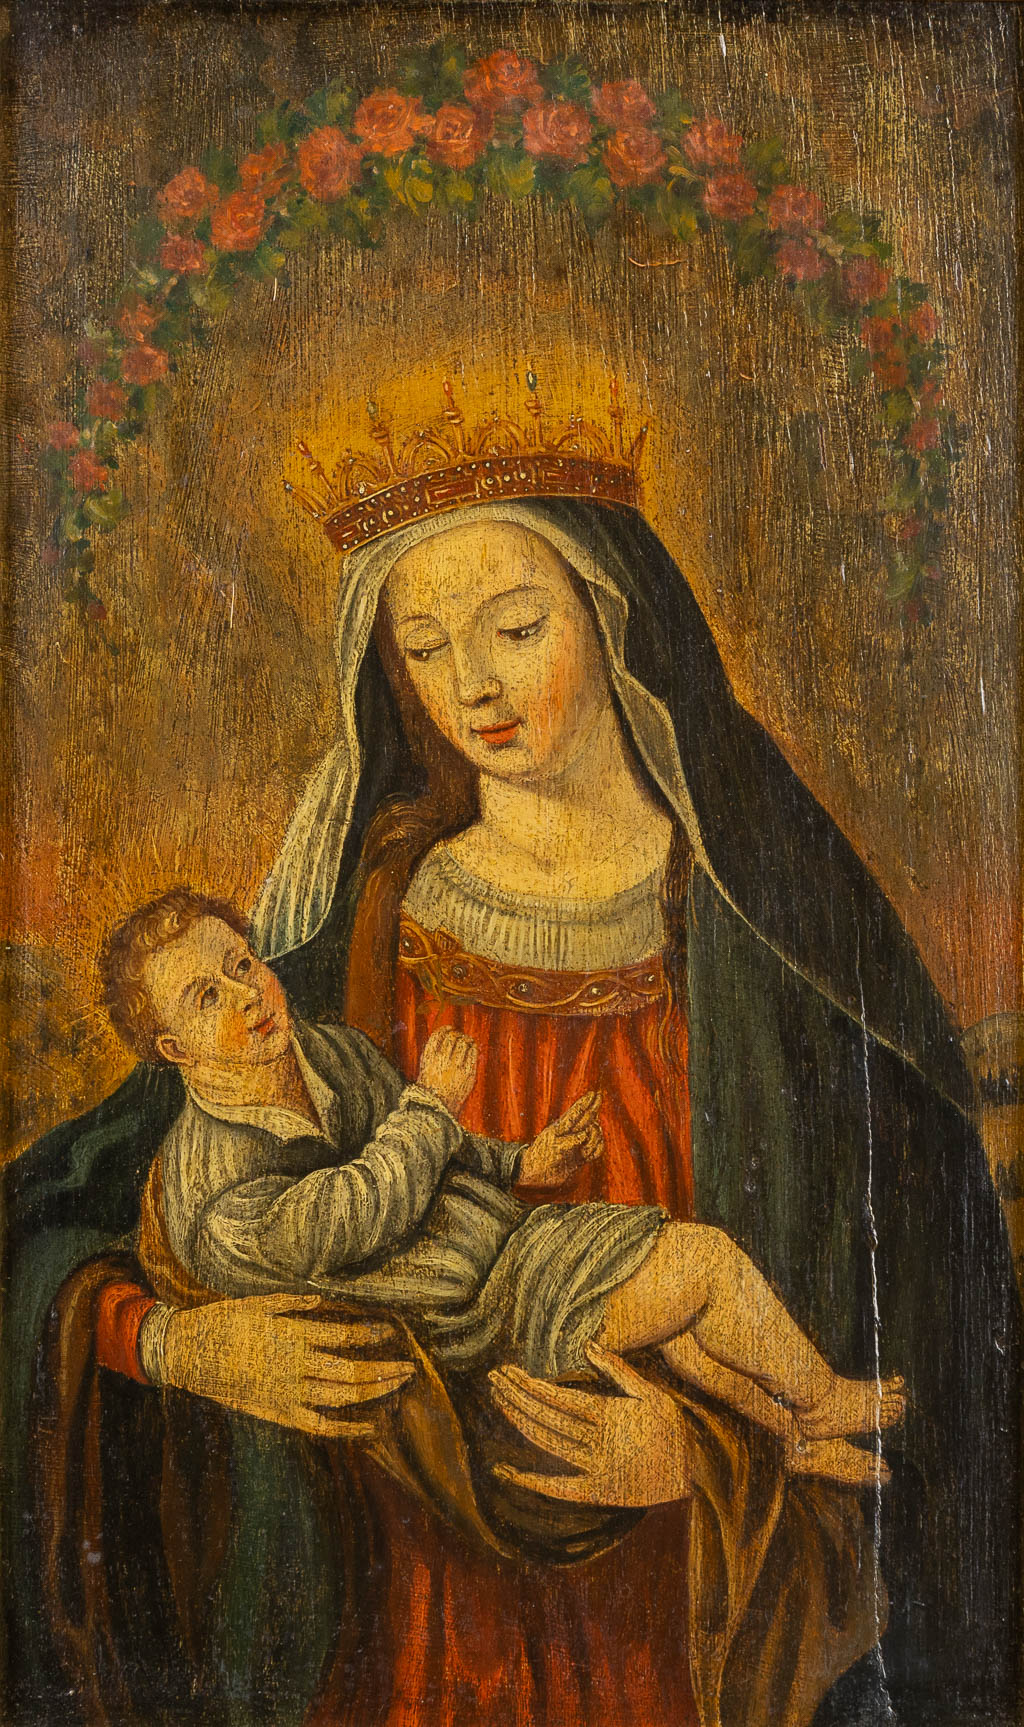 Madonna with child and roses, Oil on panel. 18th C. (W:27 x H:45 cm)